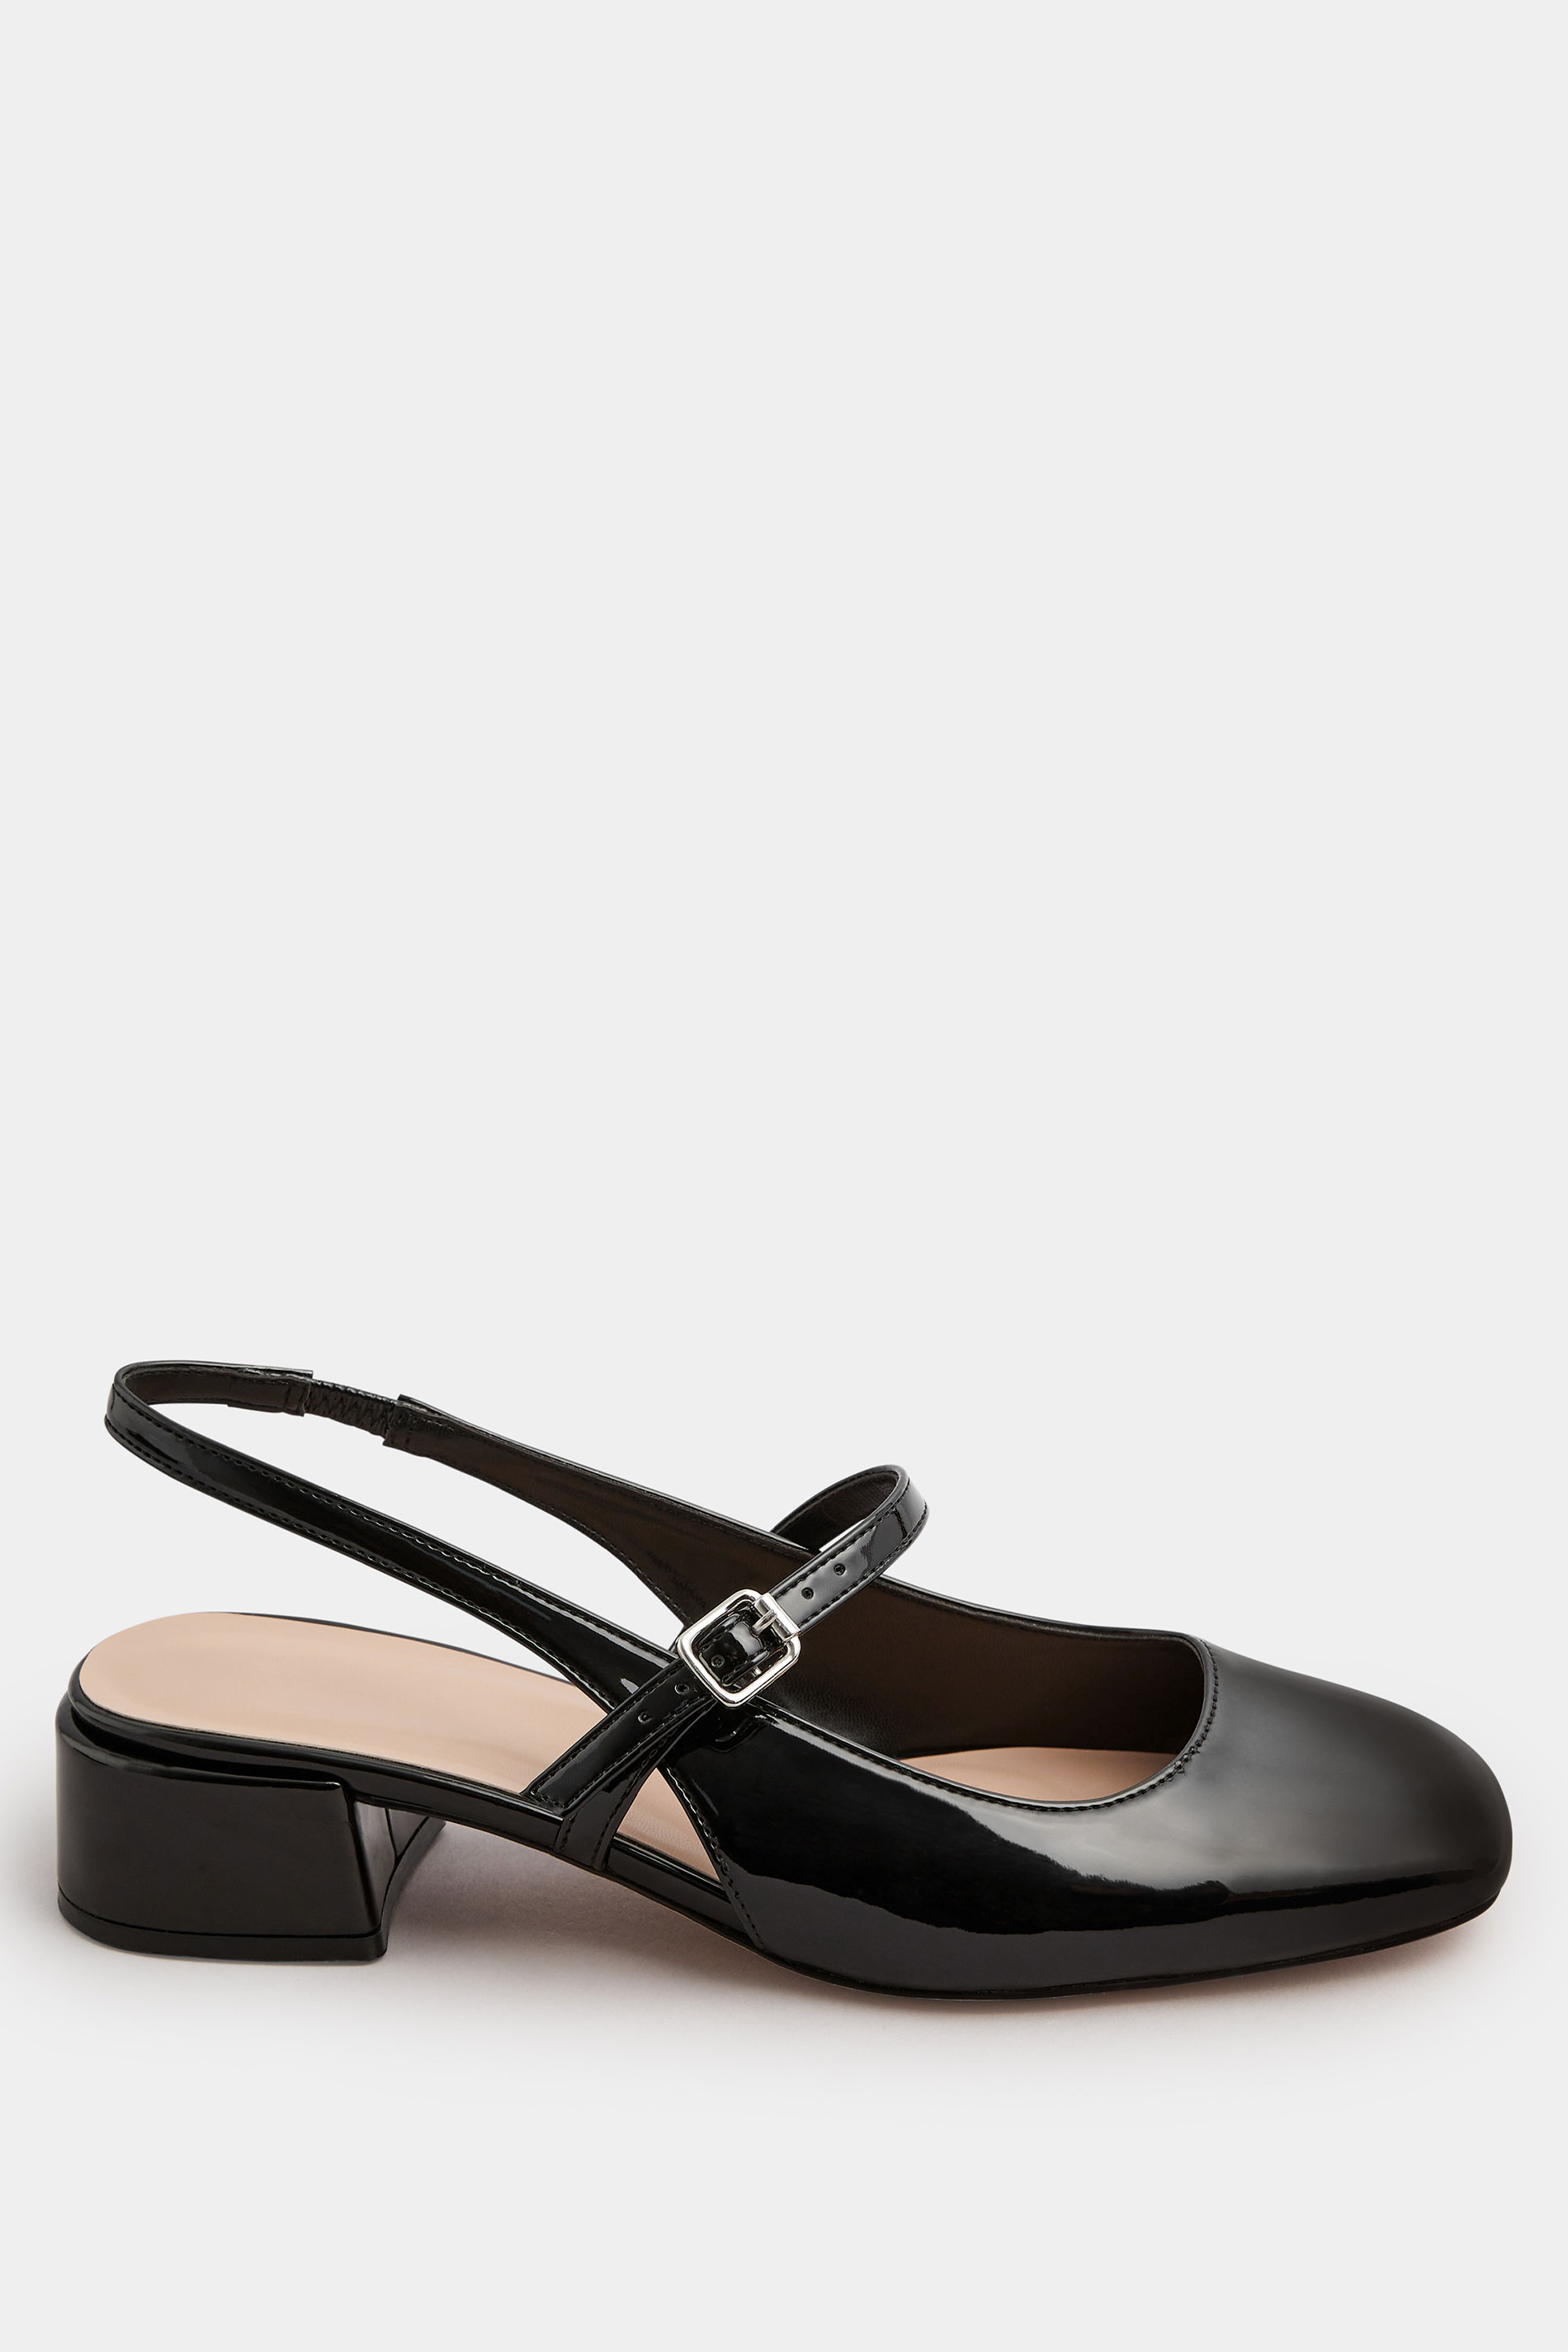 Black Patent Mary Jane Slingback Heels In Extra Wide EEE Fit | Yours Clothing 2